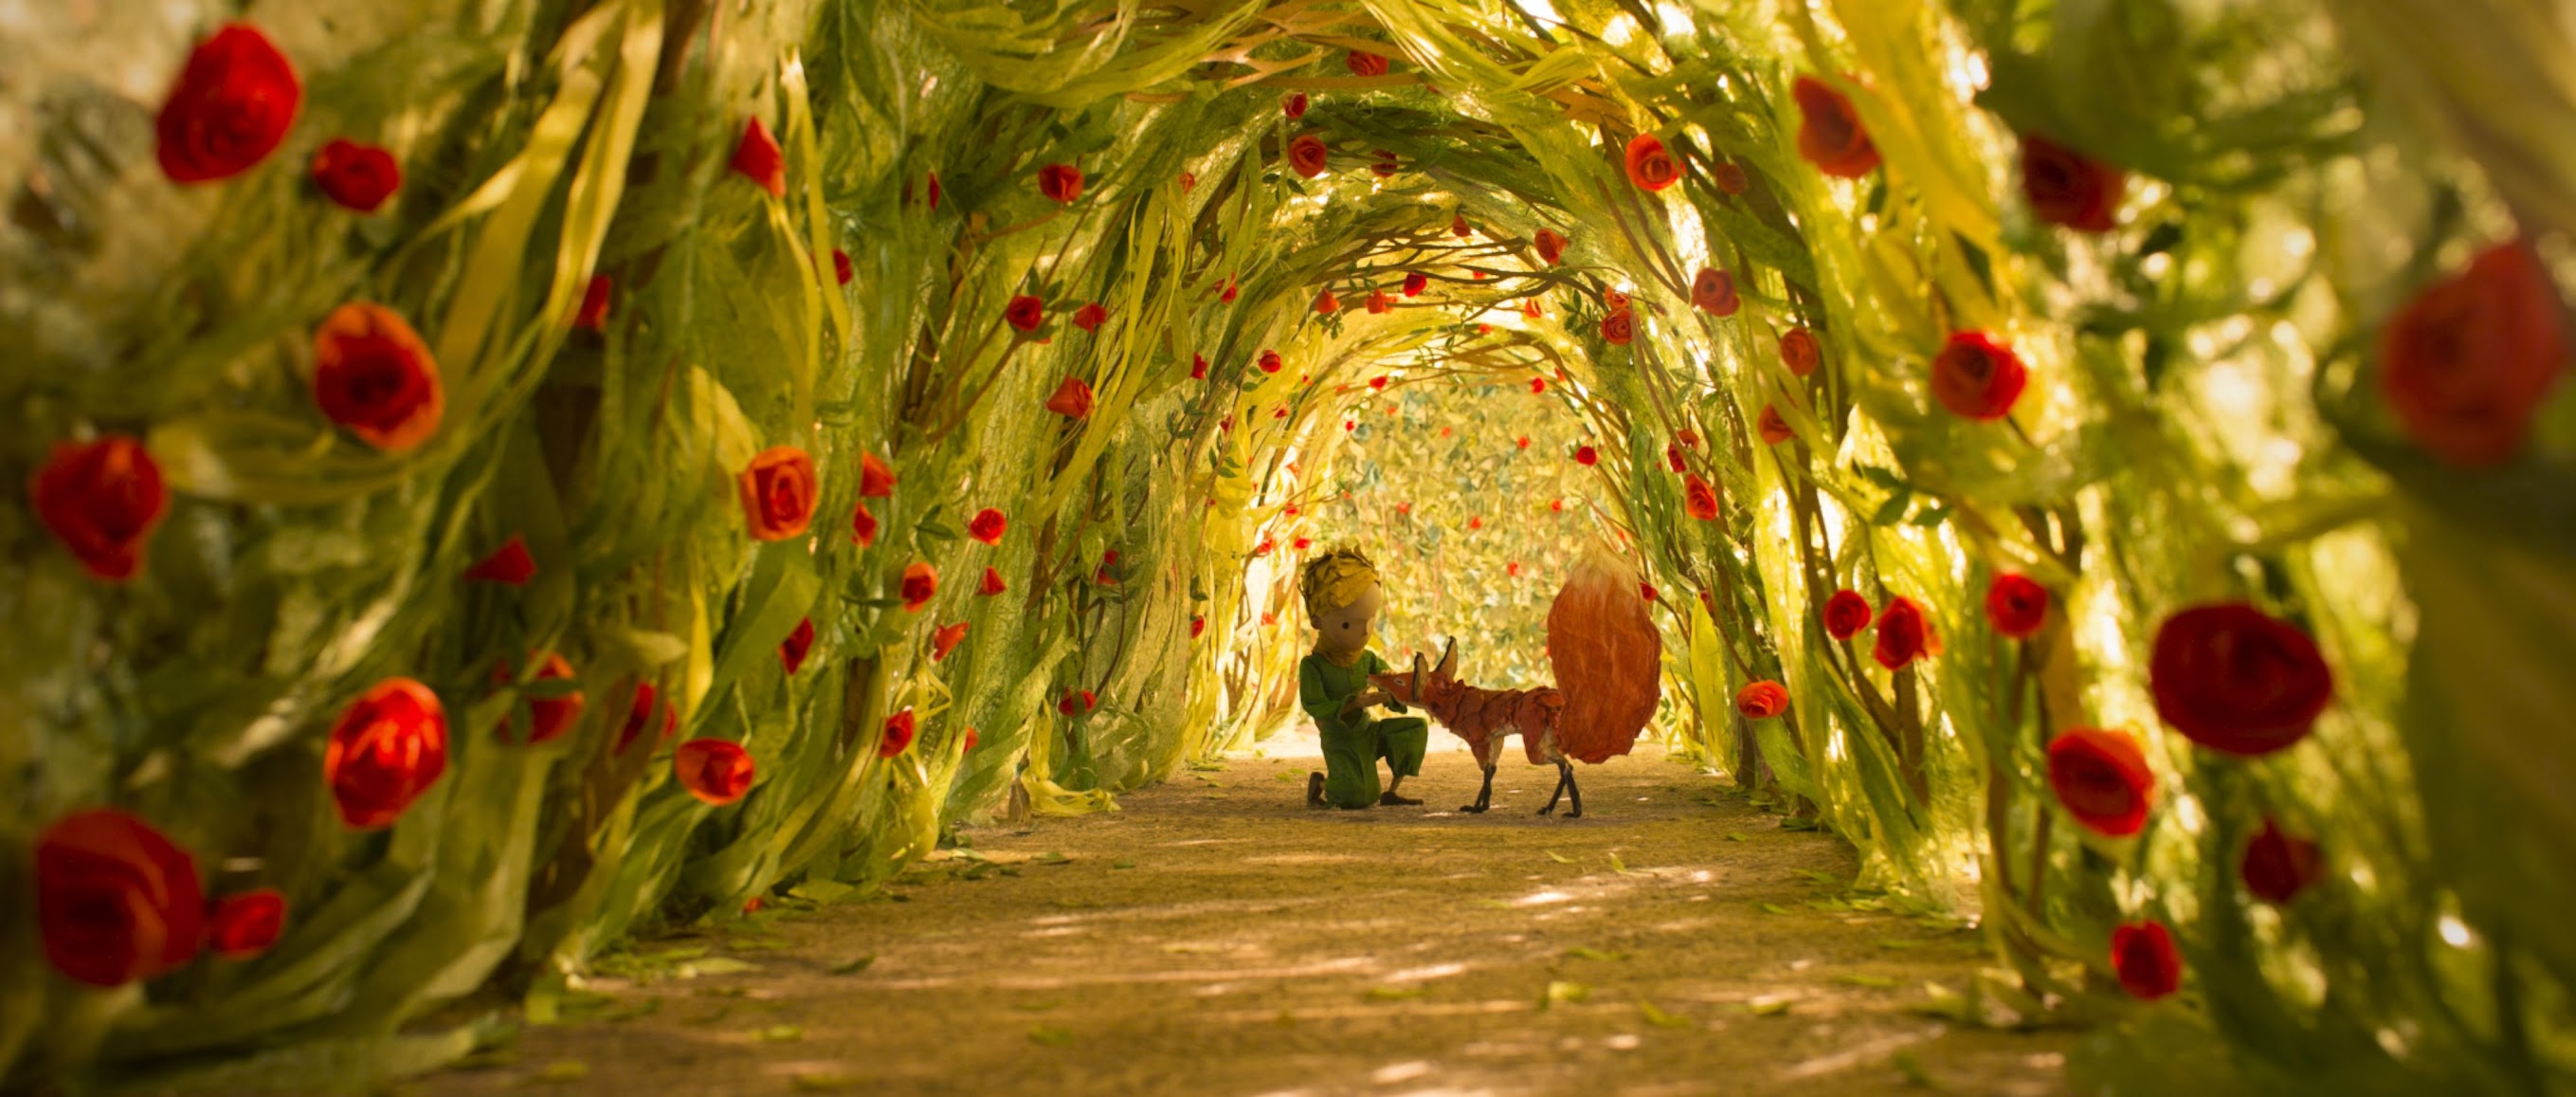 The Little Prince HD Wallpaper and Background